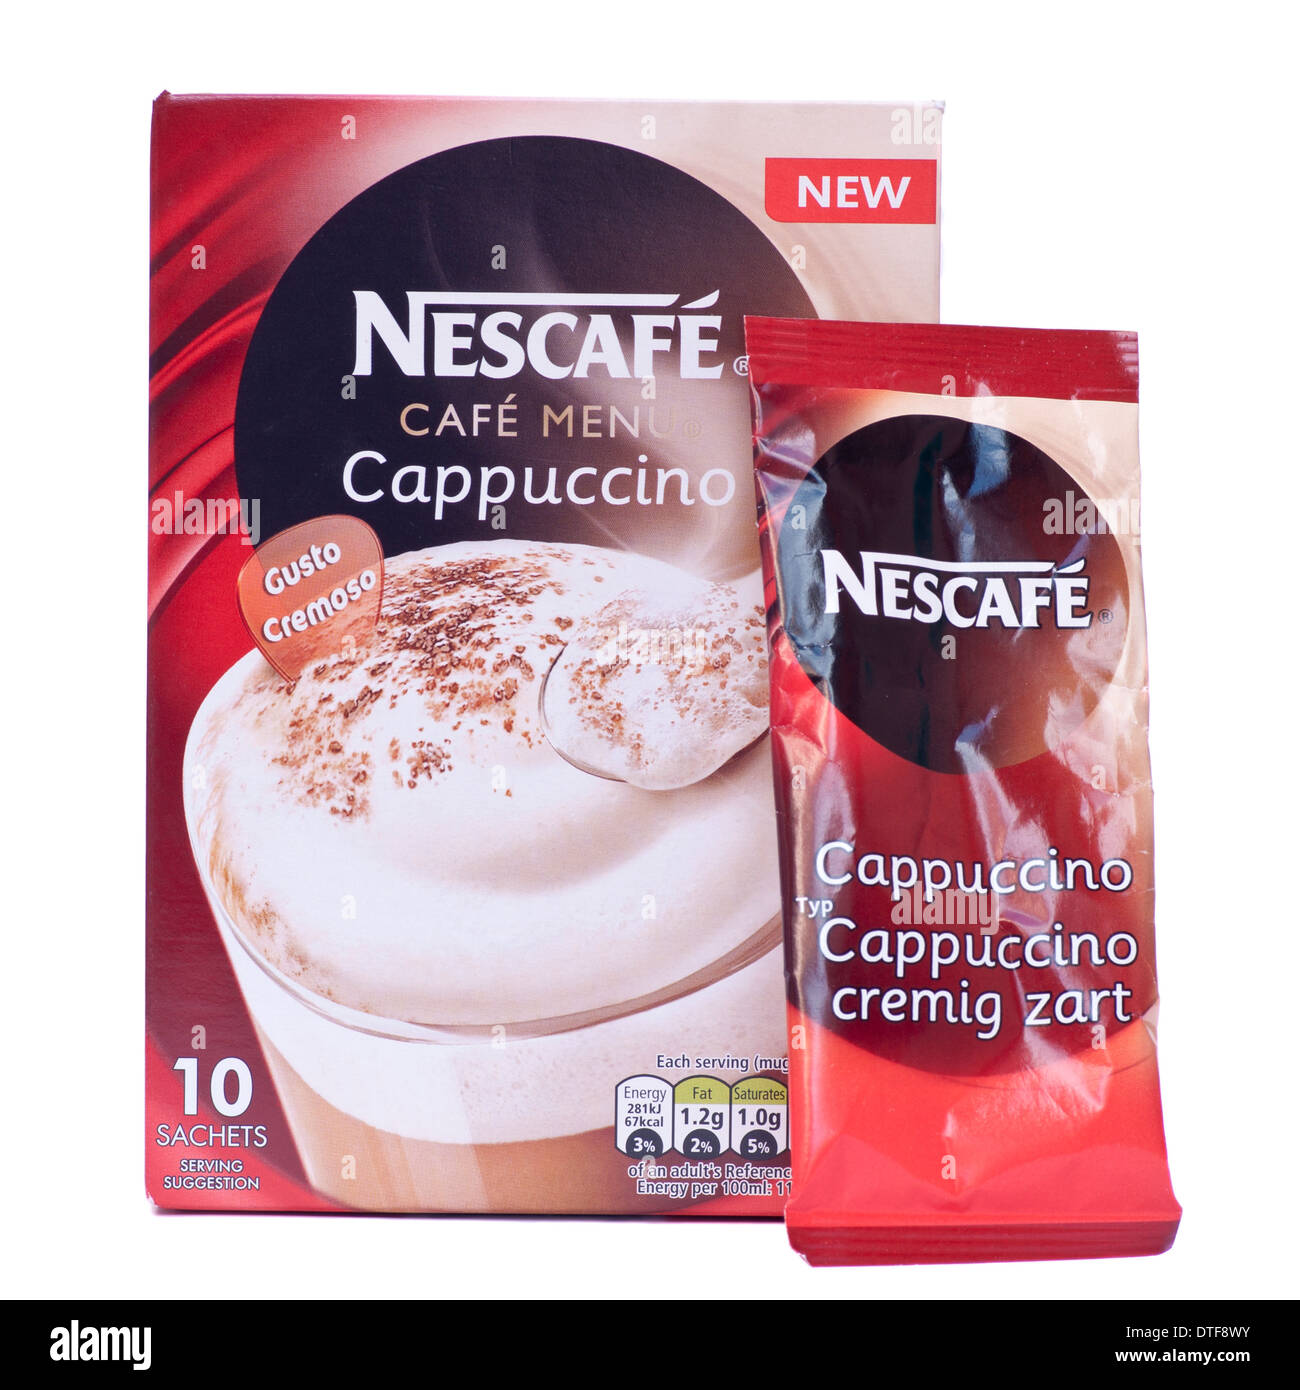 https://c8.alamy.com/comp/DTF8WY/packet-of-nescafe-cappuccino-coffee-sachets-DTF8WY.jpg